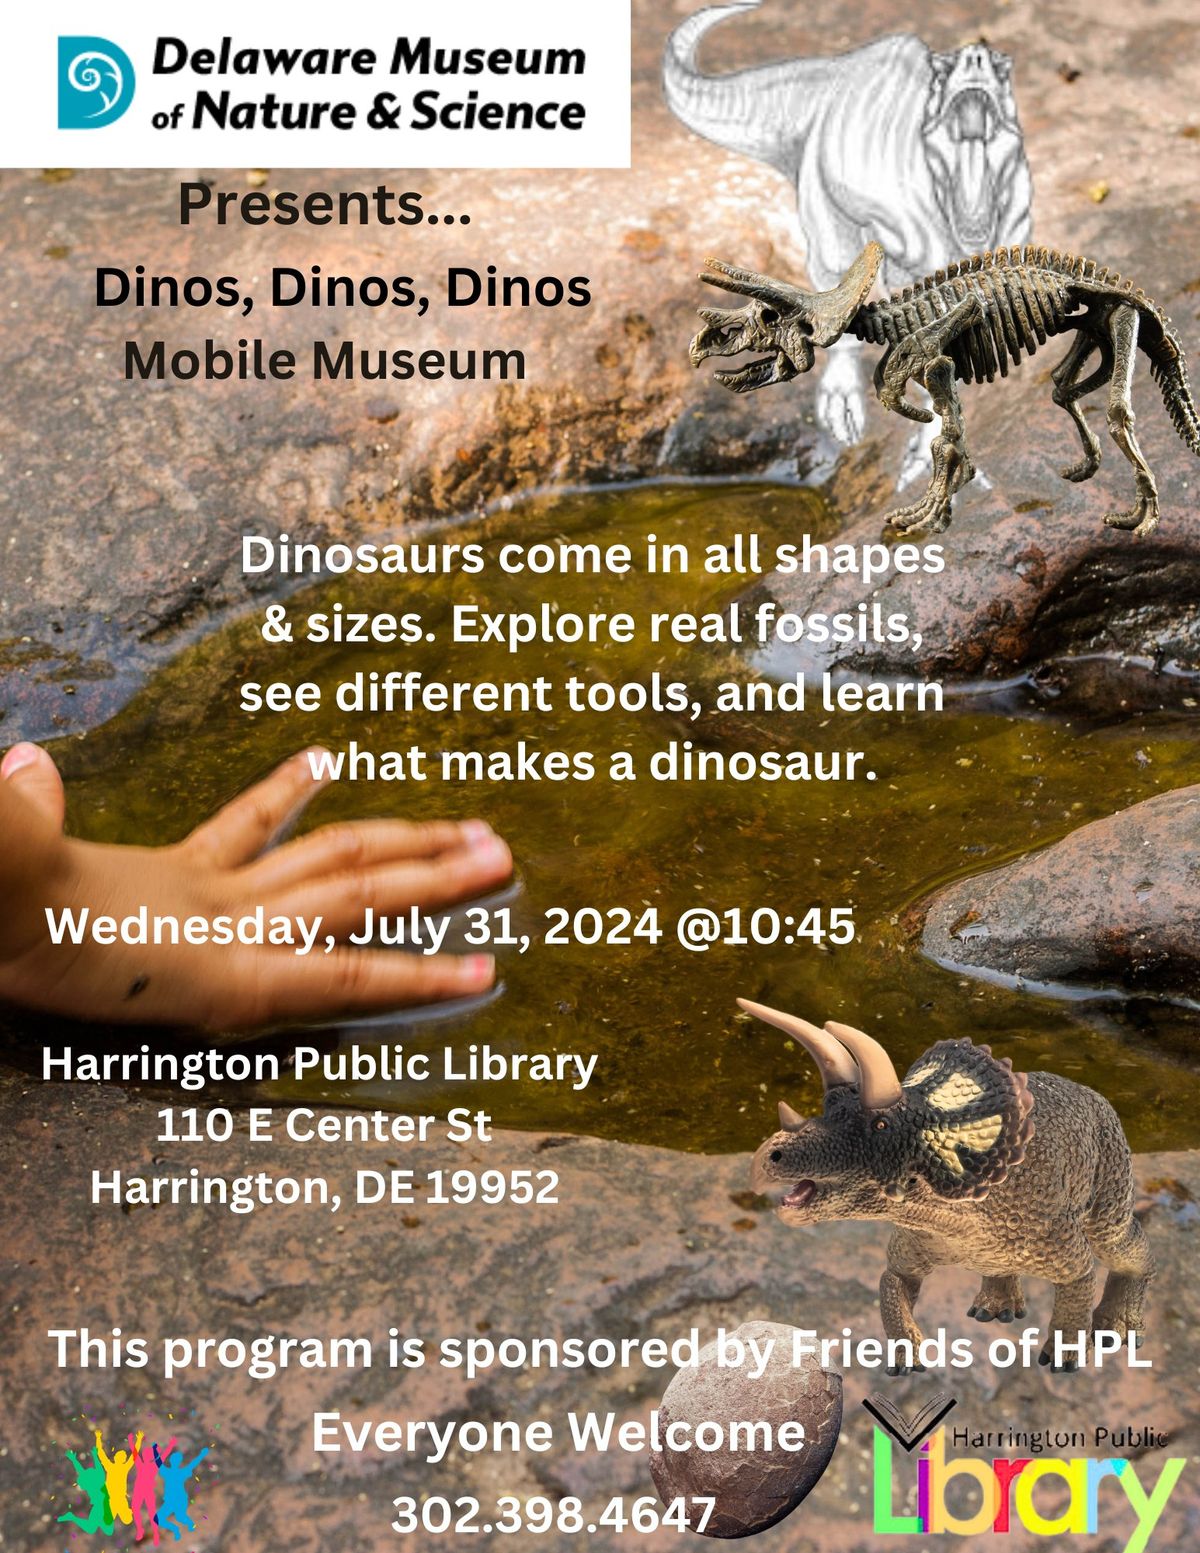 Dinos, Dinos, Dinos! \ud83e\udd96\ud83e\udd95\ud83e\uddb4(Mobile Museum) [presented by Delaware Museum of Nature & Science] 